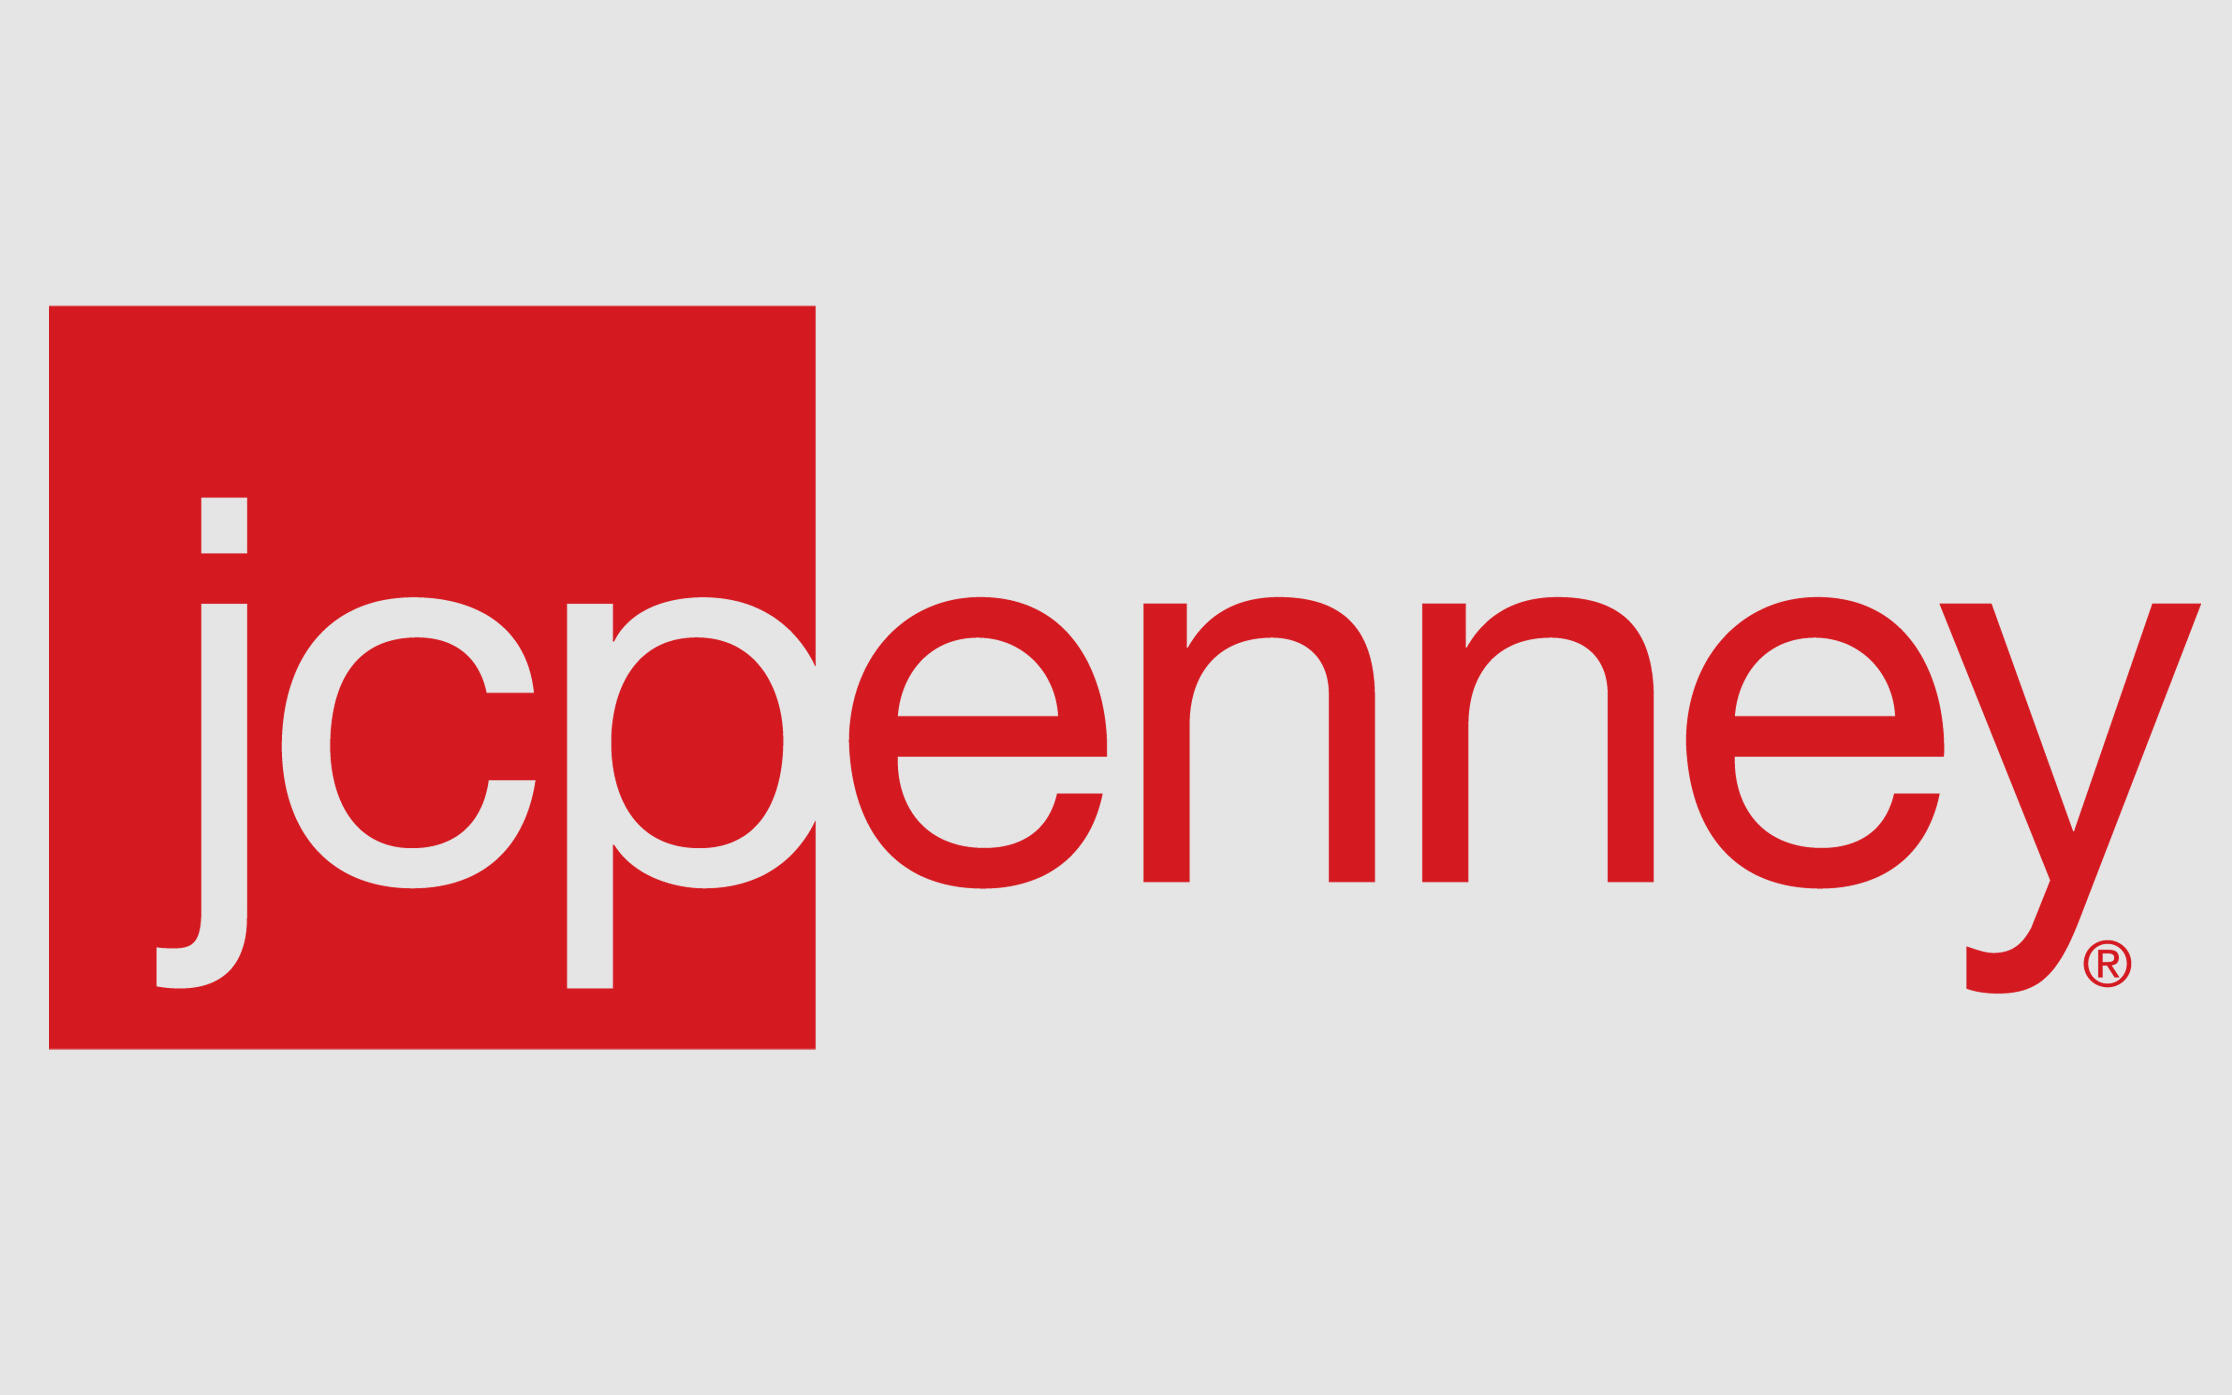 How it all went wrong at JCPenney